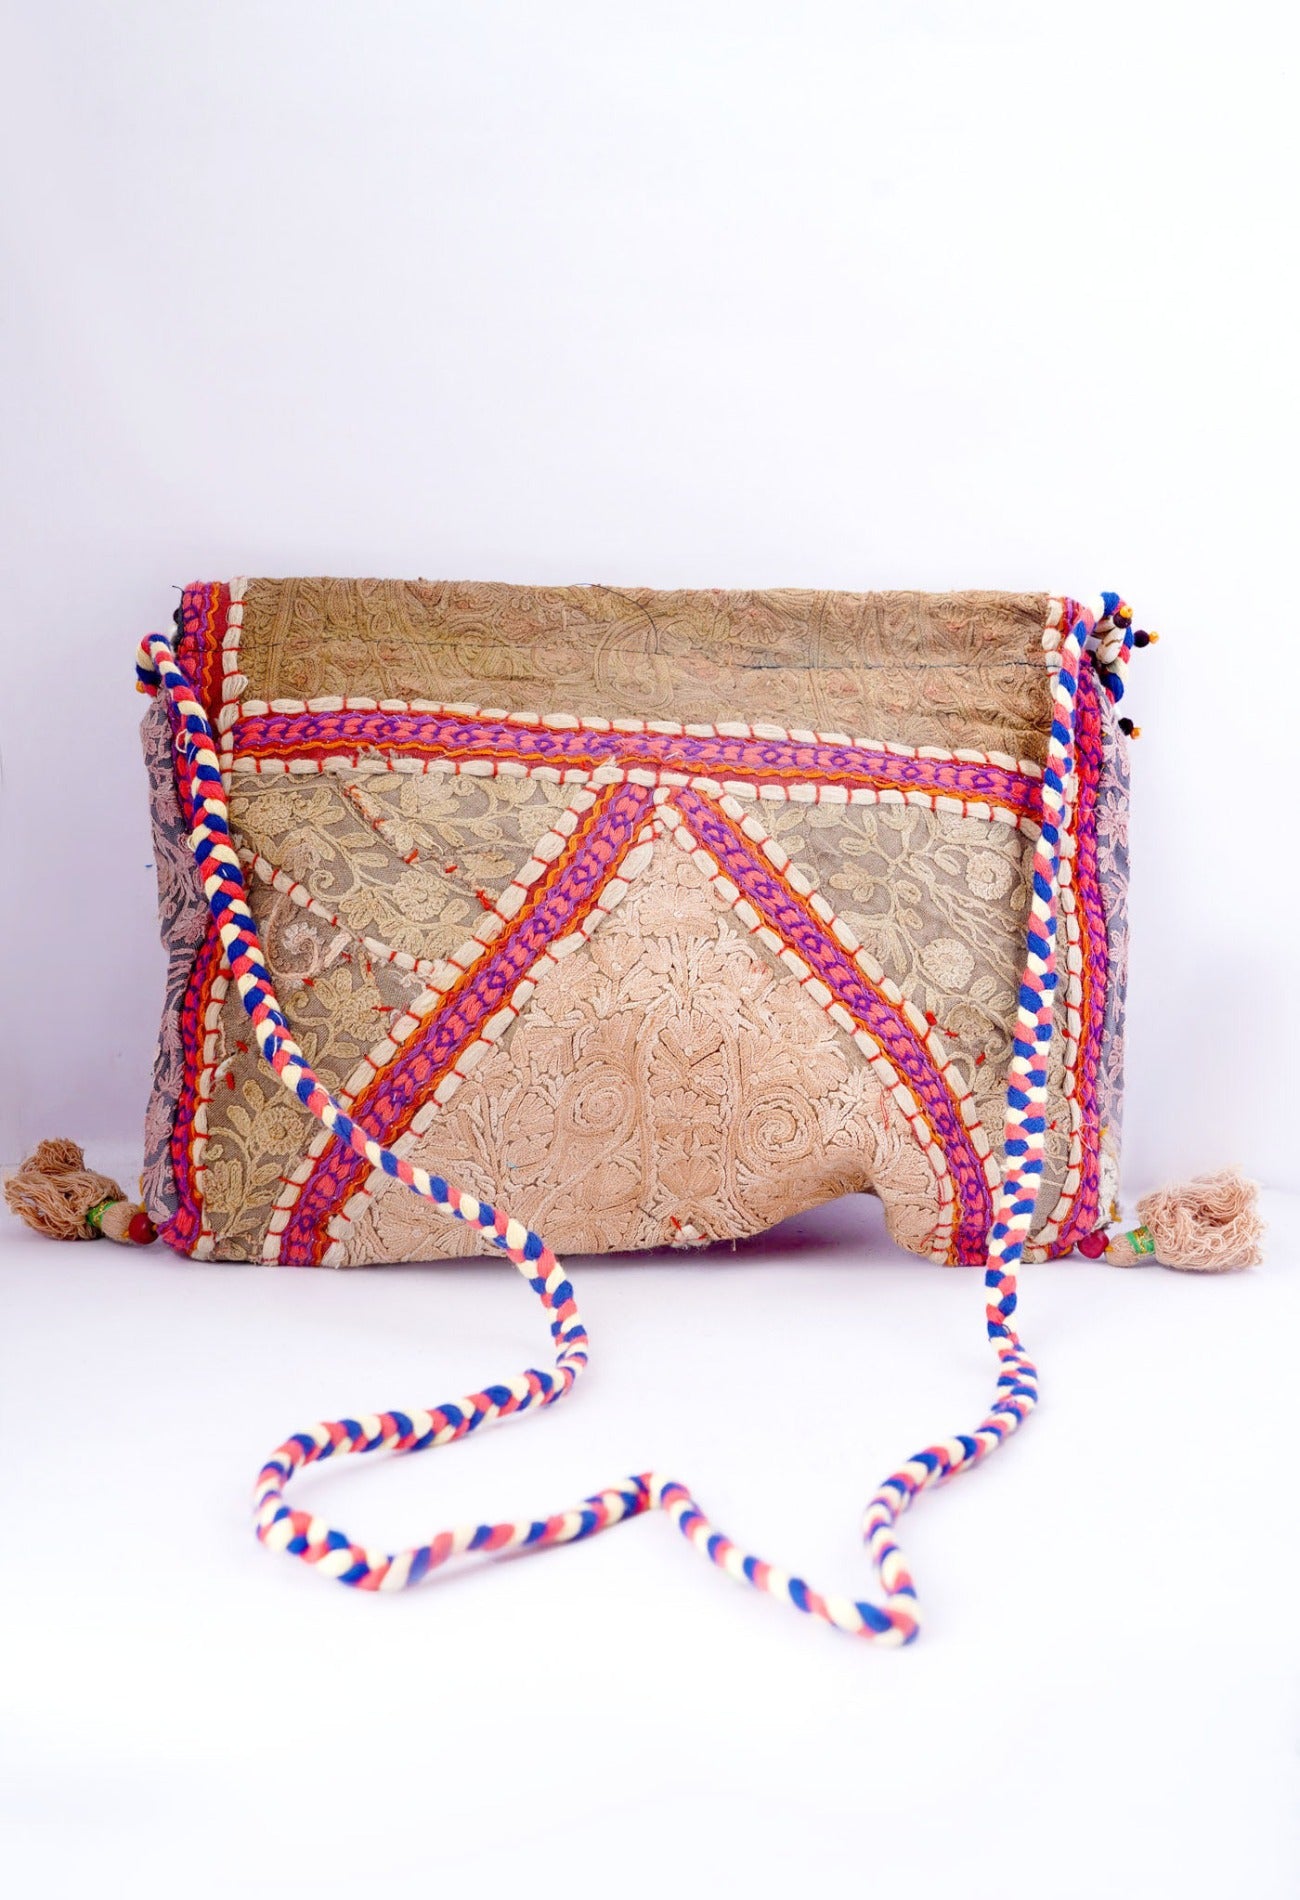 Online Shopping for Cream Indian Handicraft Embroidered Hand Bag with Weaving from Rajasthan at Unnatisilks.com India_x000D_
Online Shopping for Cream Indian Handicraft Embroidered Hand Bag with Weaving from Rajasthan at Unnatisilks.com India_x000D_
Online Shopping for Cream Indian Handicraft Embroidered Hand Bag with Weaving from Rajasthan at Unnatisilks.com India_x000D_
